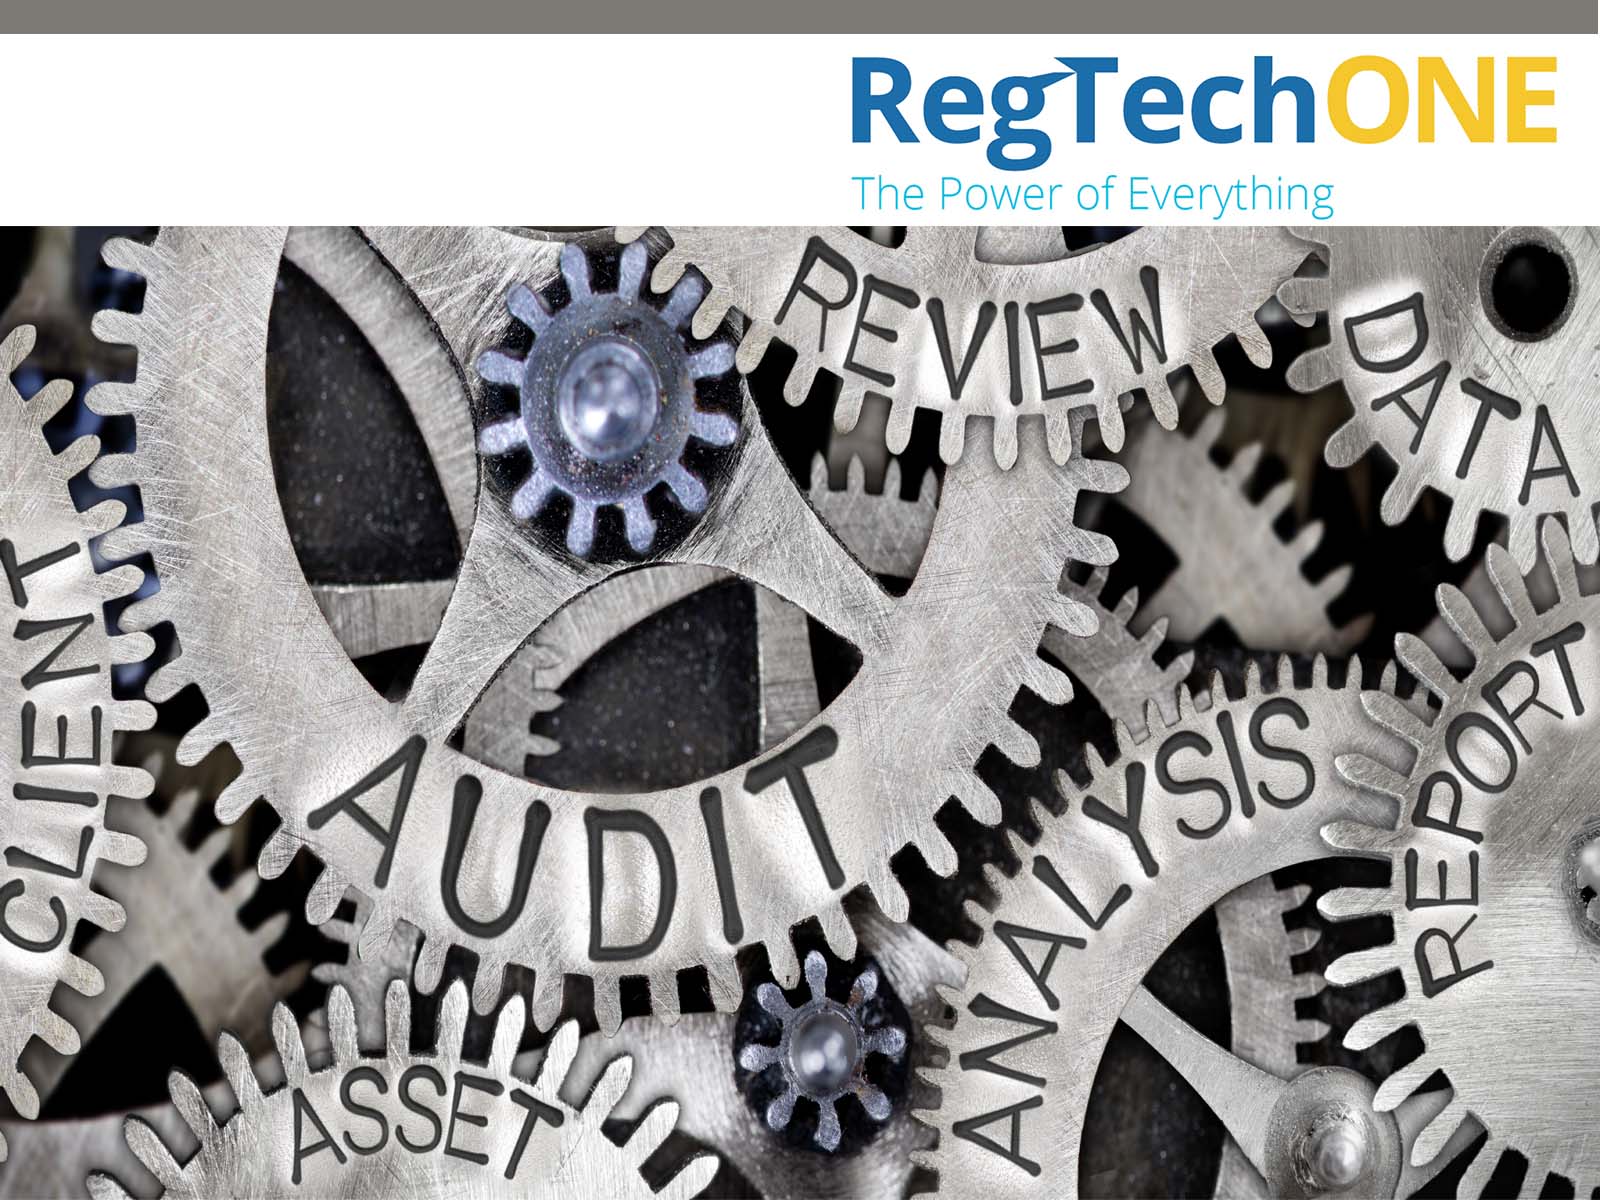 This art shows many silver gears (like watch gears). Text on the gears refers to the work of Governance Risk and Compliance in AML and related. The text etched into the gears includes the following words: audit, asset, analysis, report, client, review, and data.